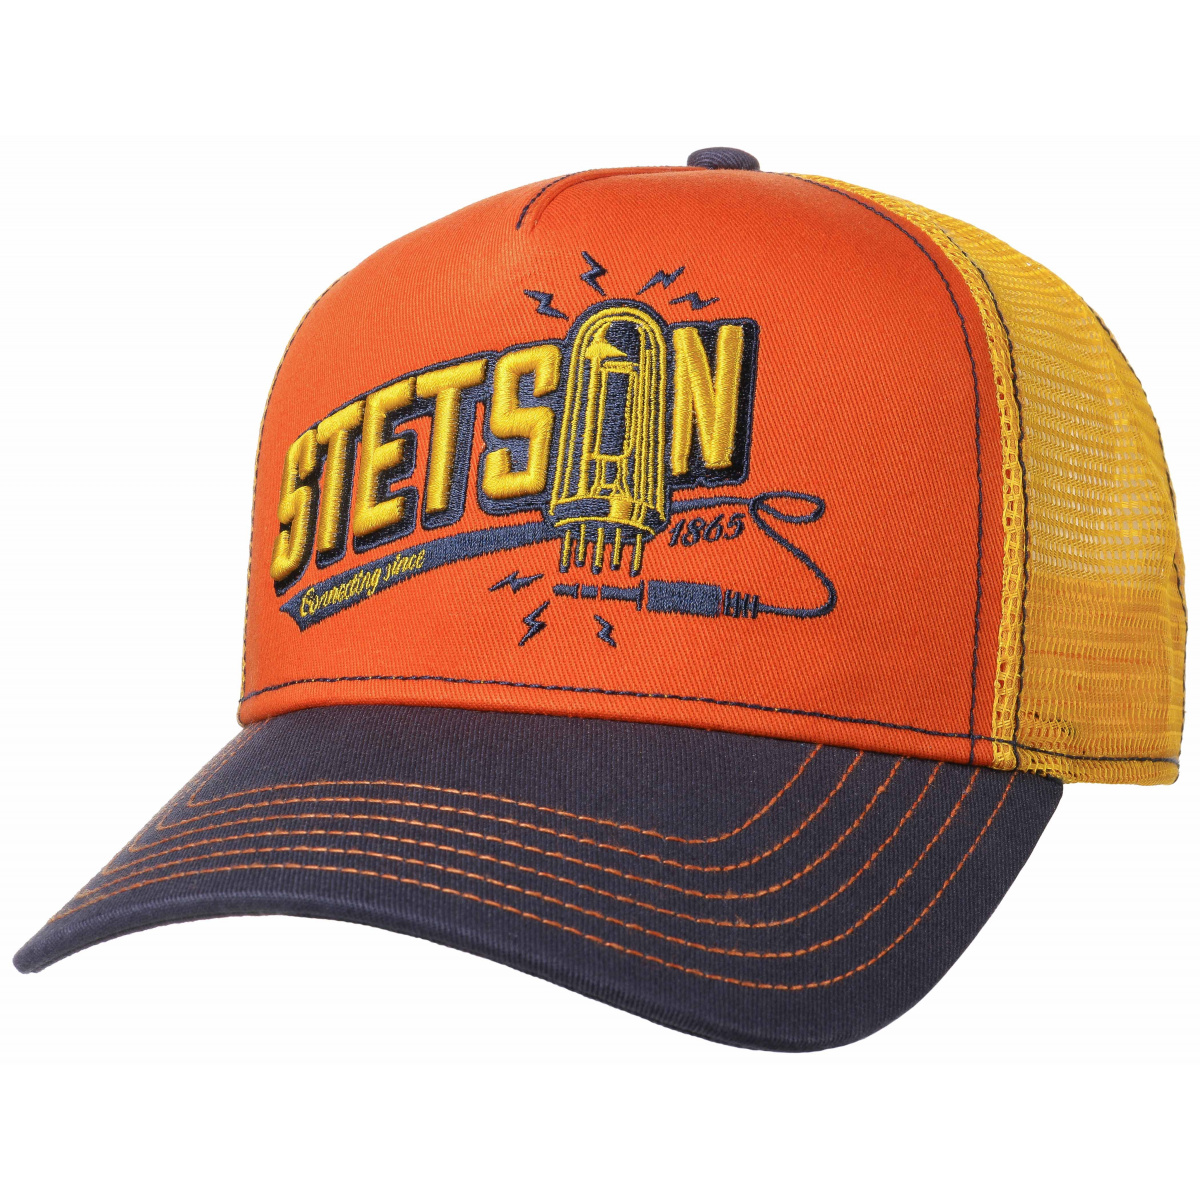 Trucker Connecting Orange & Yellow Cap- Stetson Reference : 10812 ...